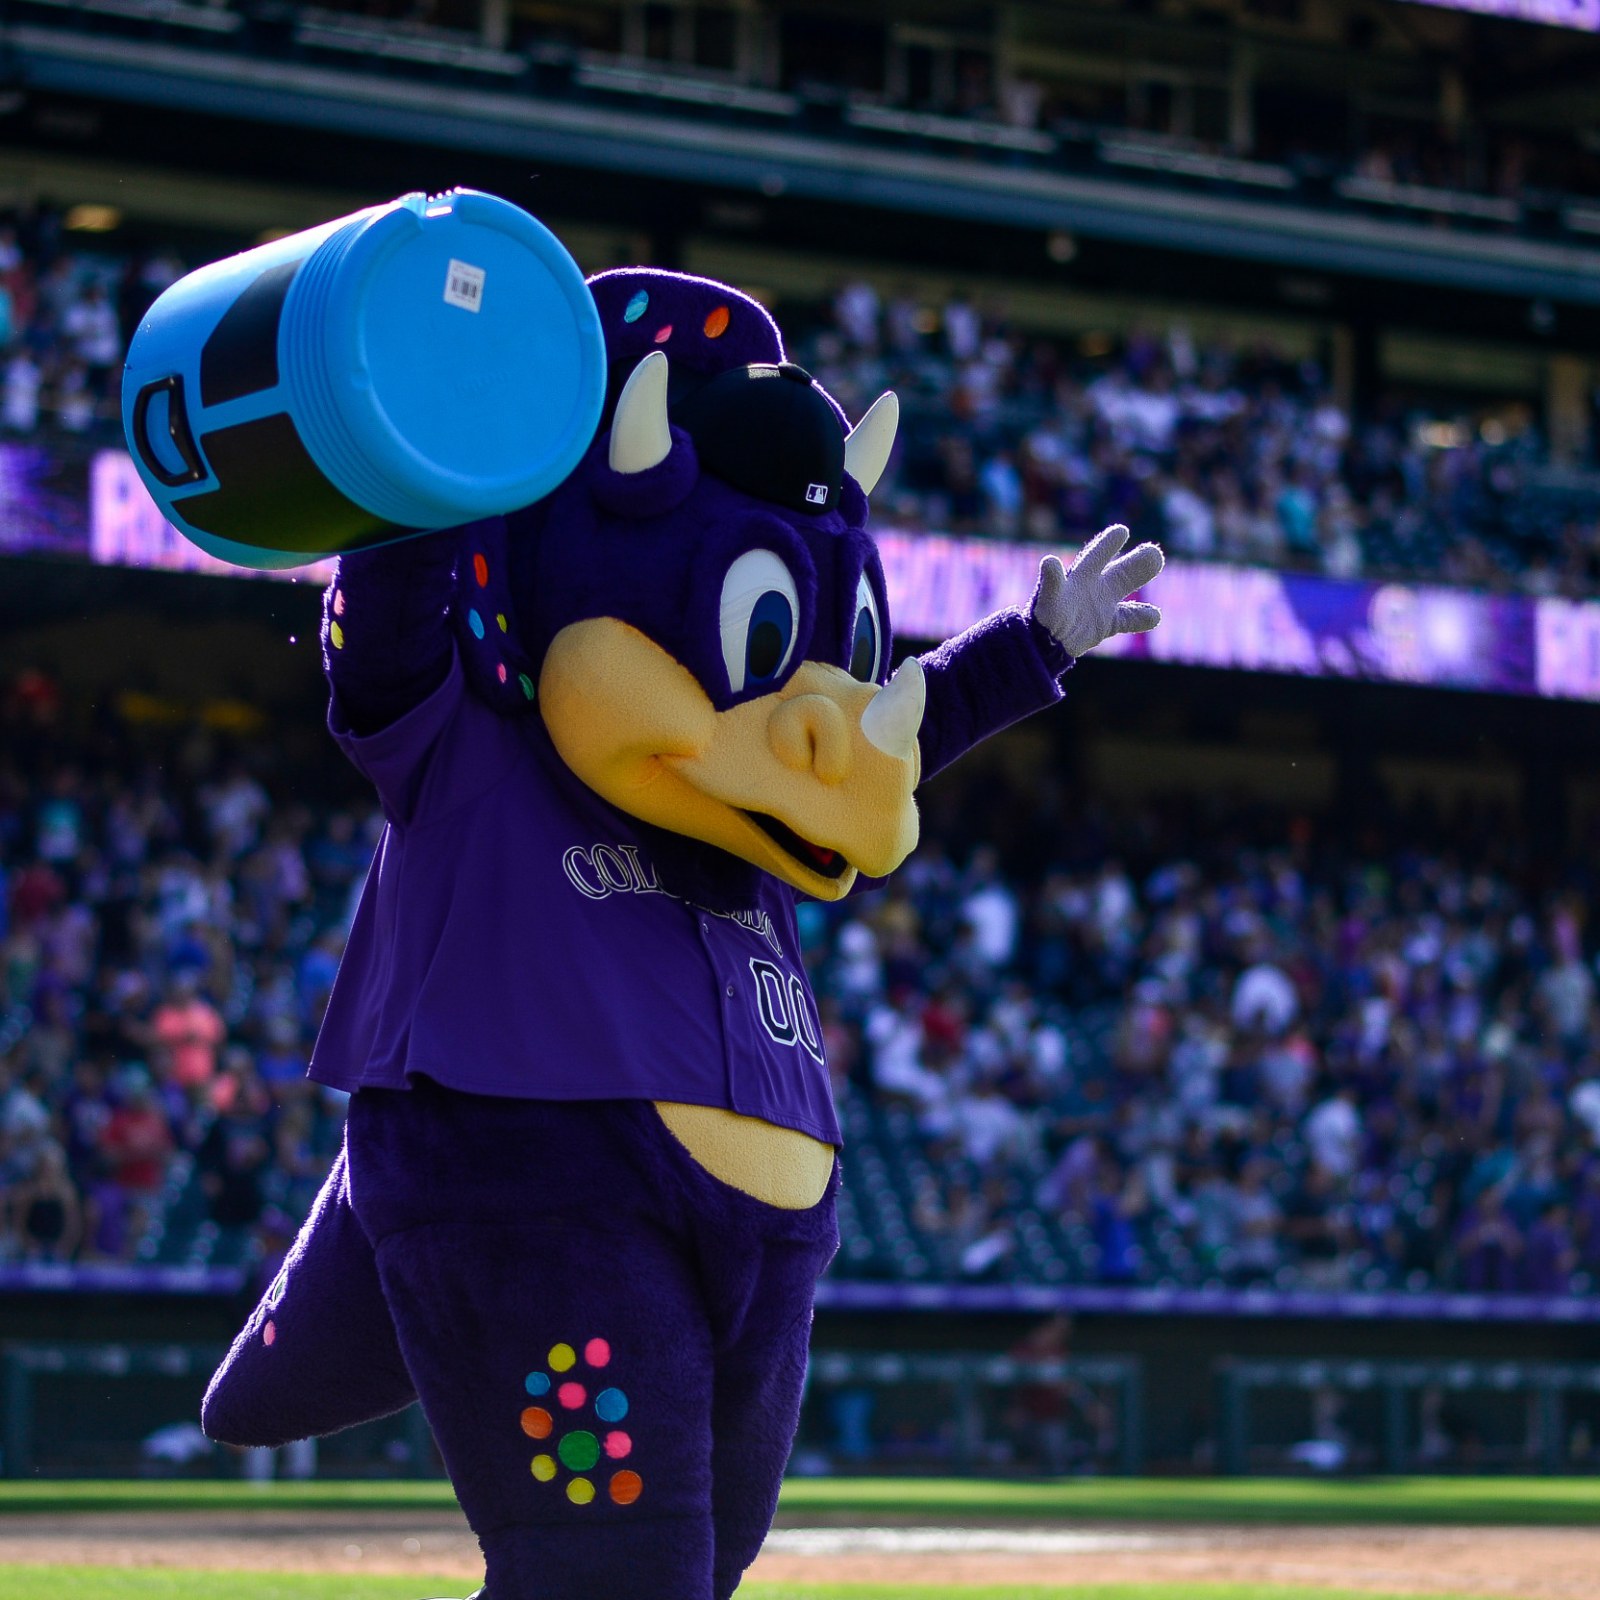 Dinger Mascot Theory Spreads Online Over Racial Slur Heard at Rockies Game